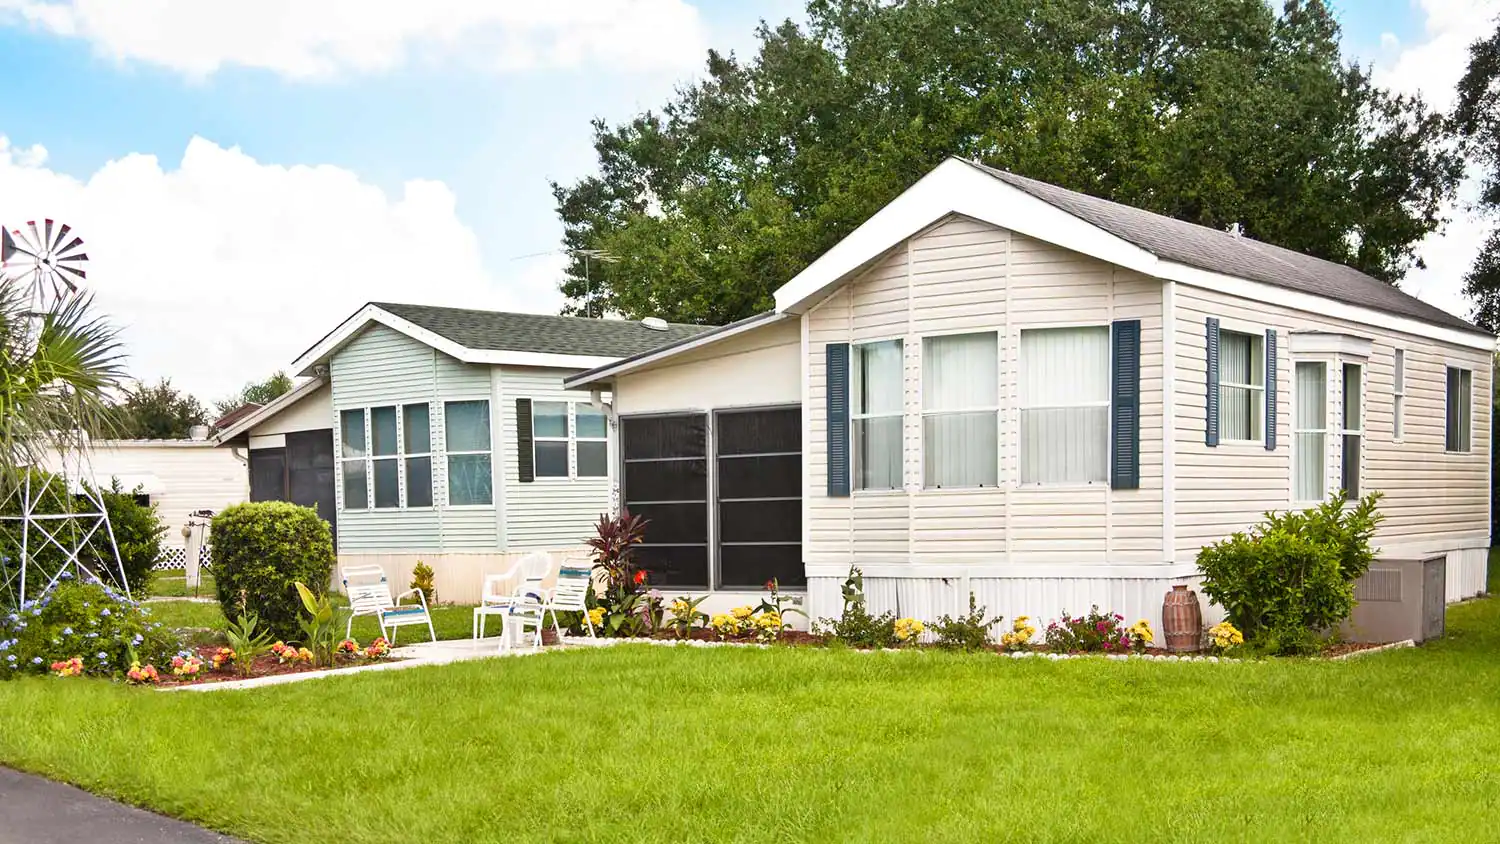 Understanding the Legal Requirements for Moving a Mobile Home